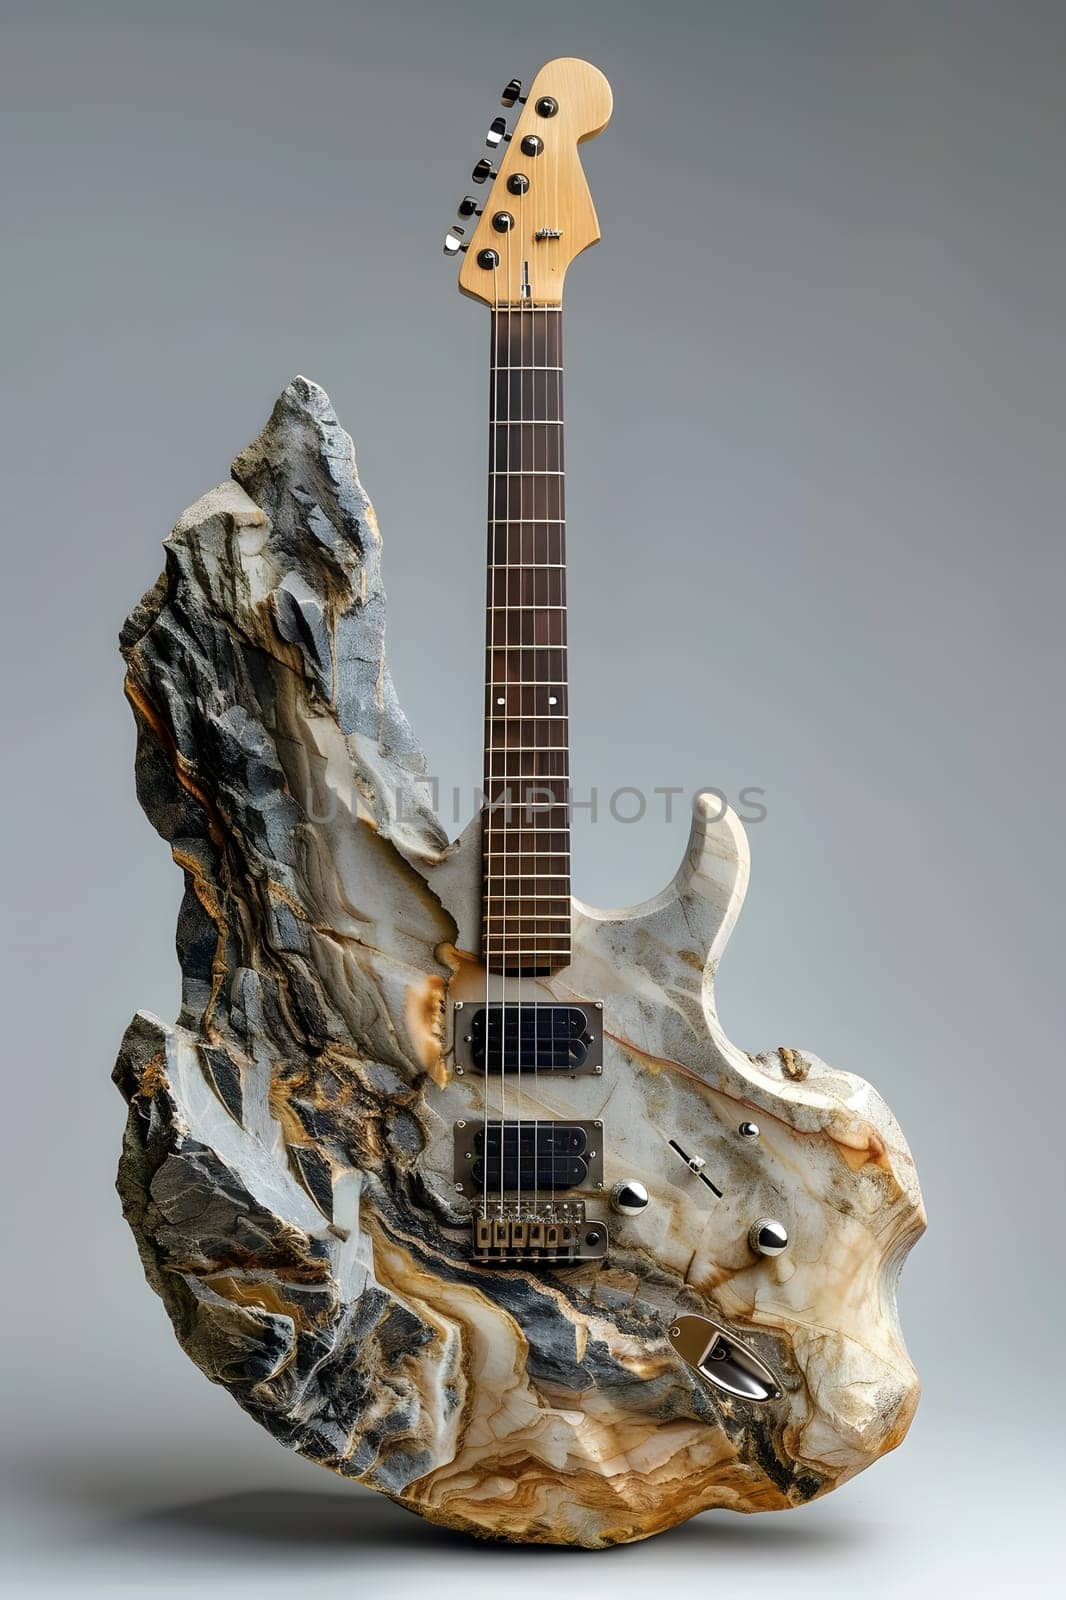 A guitar sculpted from a single piece of rock, combining art and music in a unique way. This statue serves as both a musical instrument and a beautiful piece of art